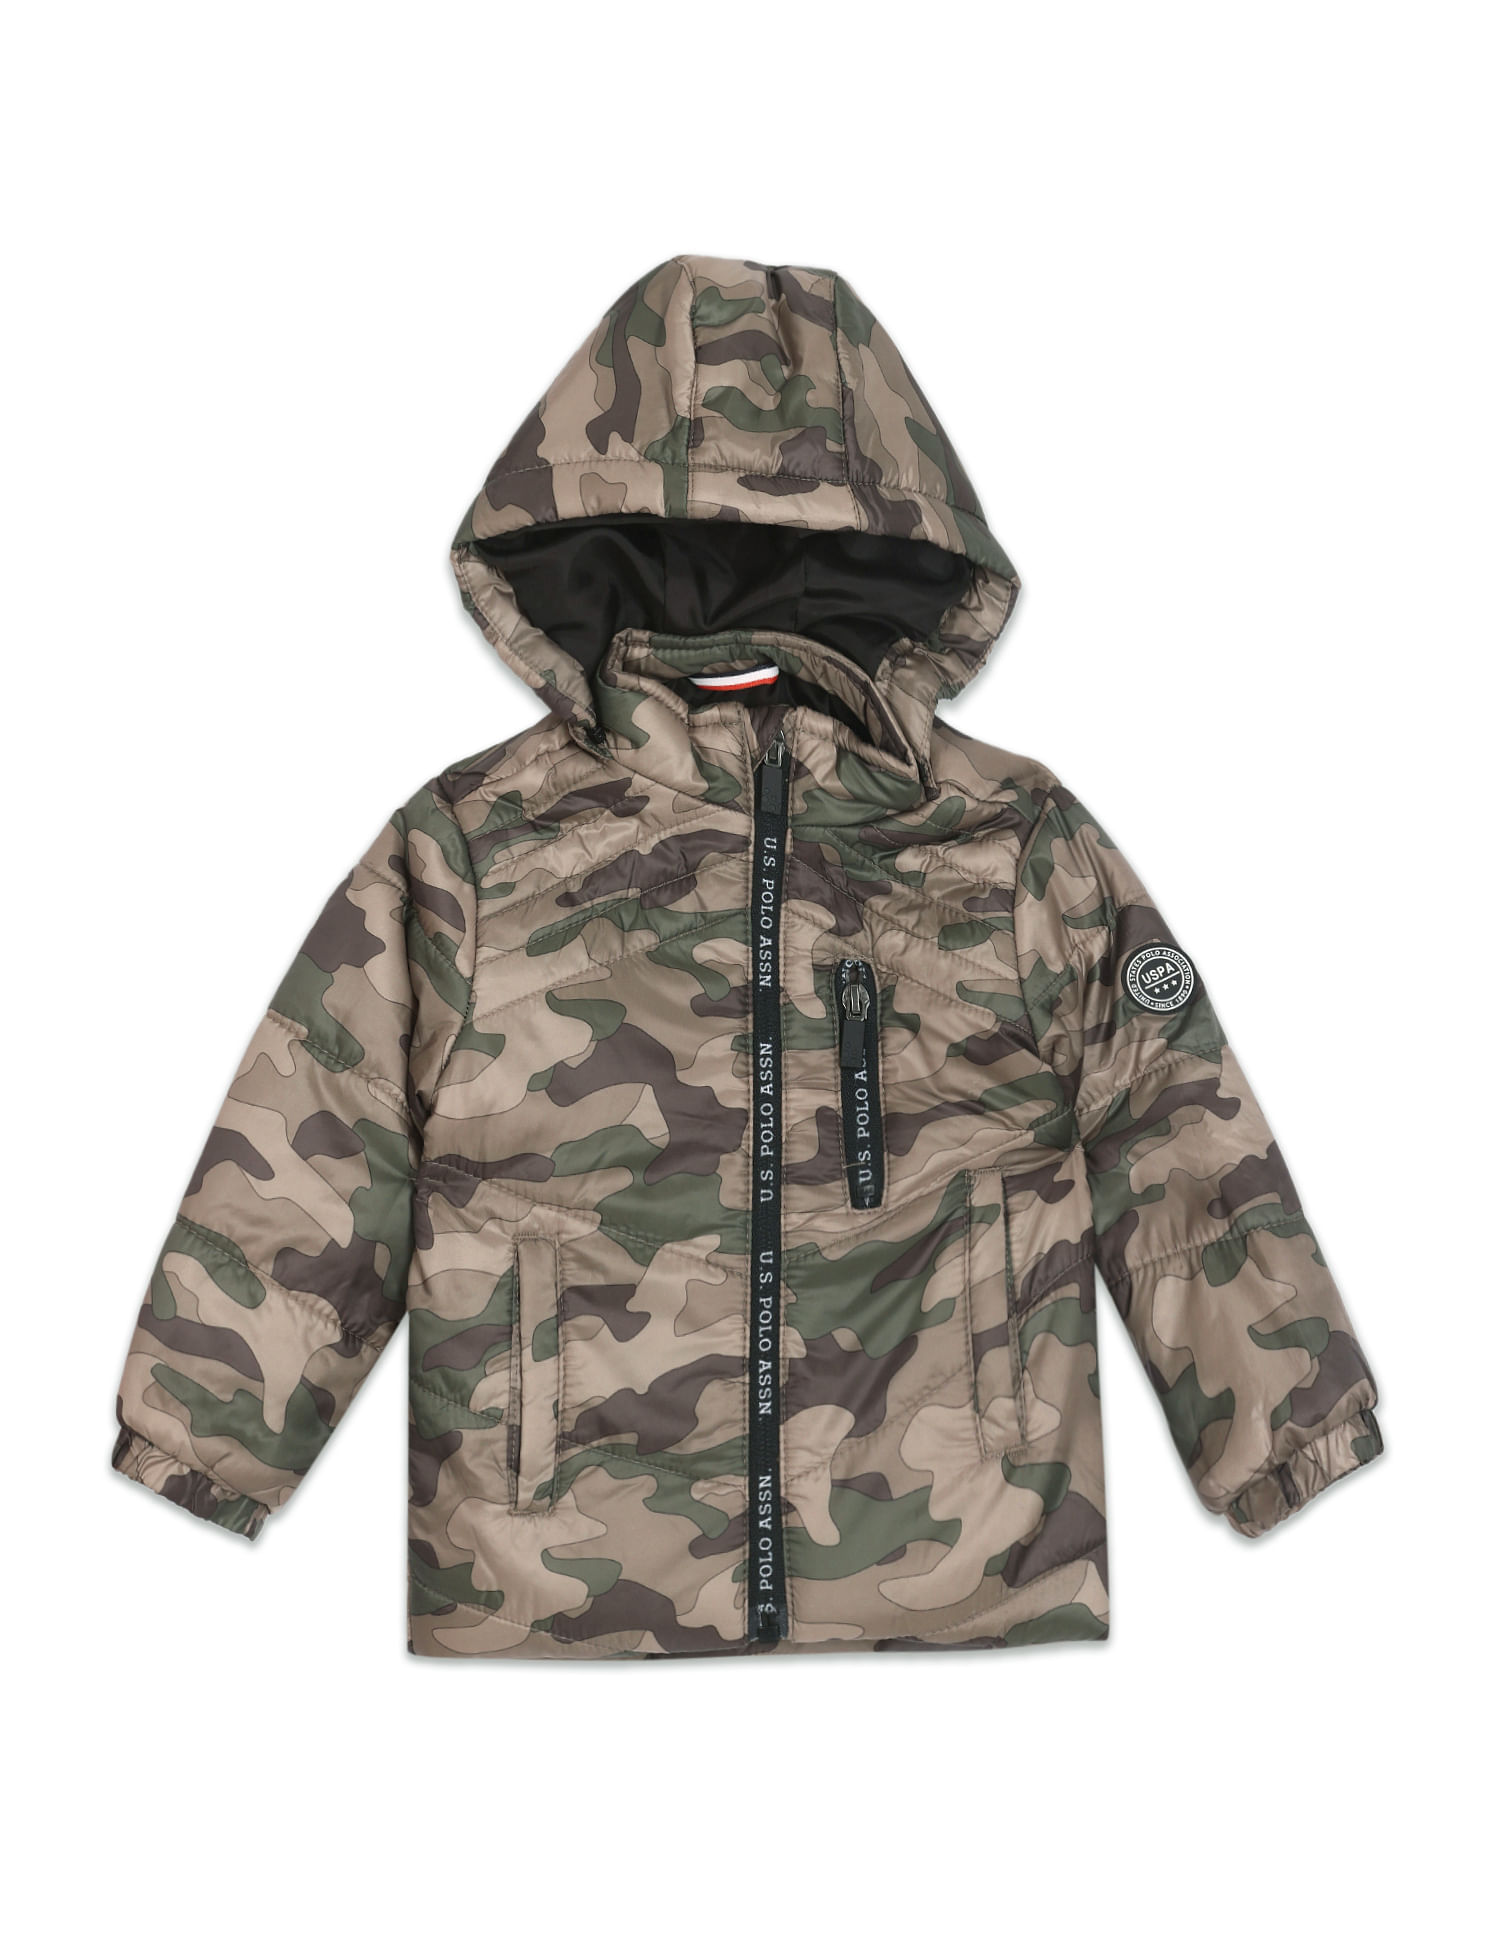 Buy Boys' Hooded Camouflage Clothing Online